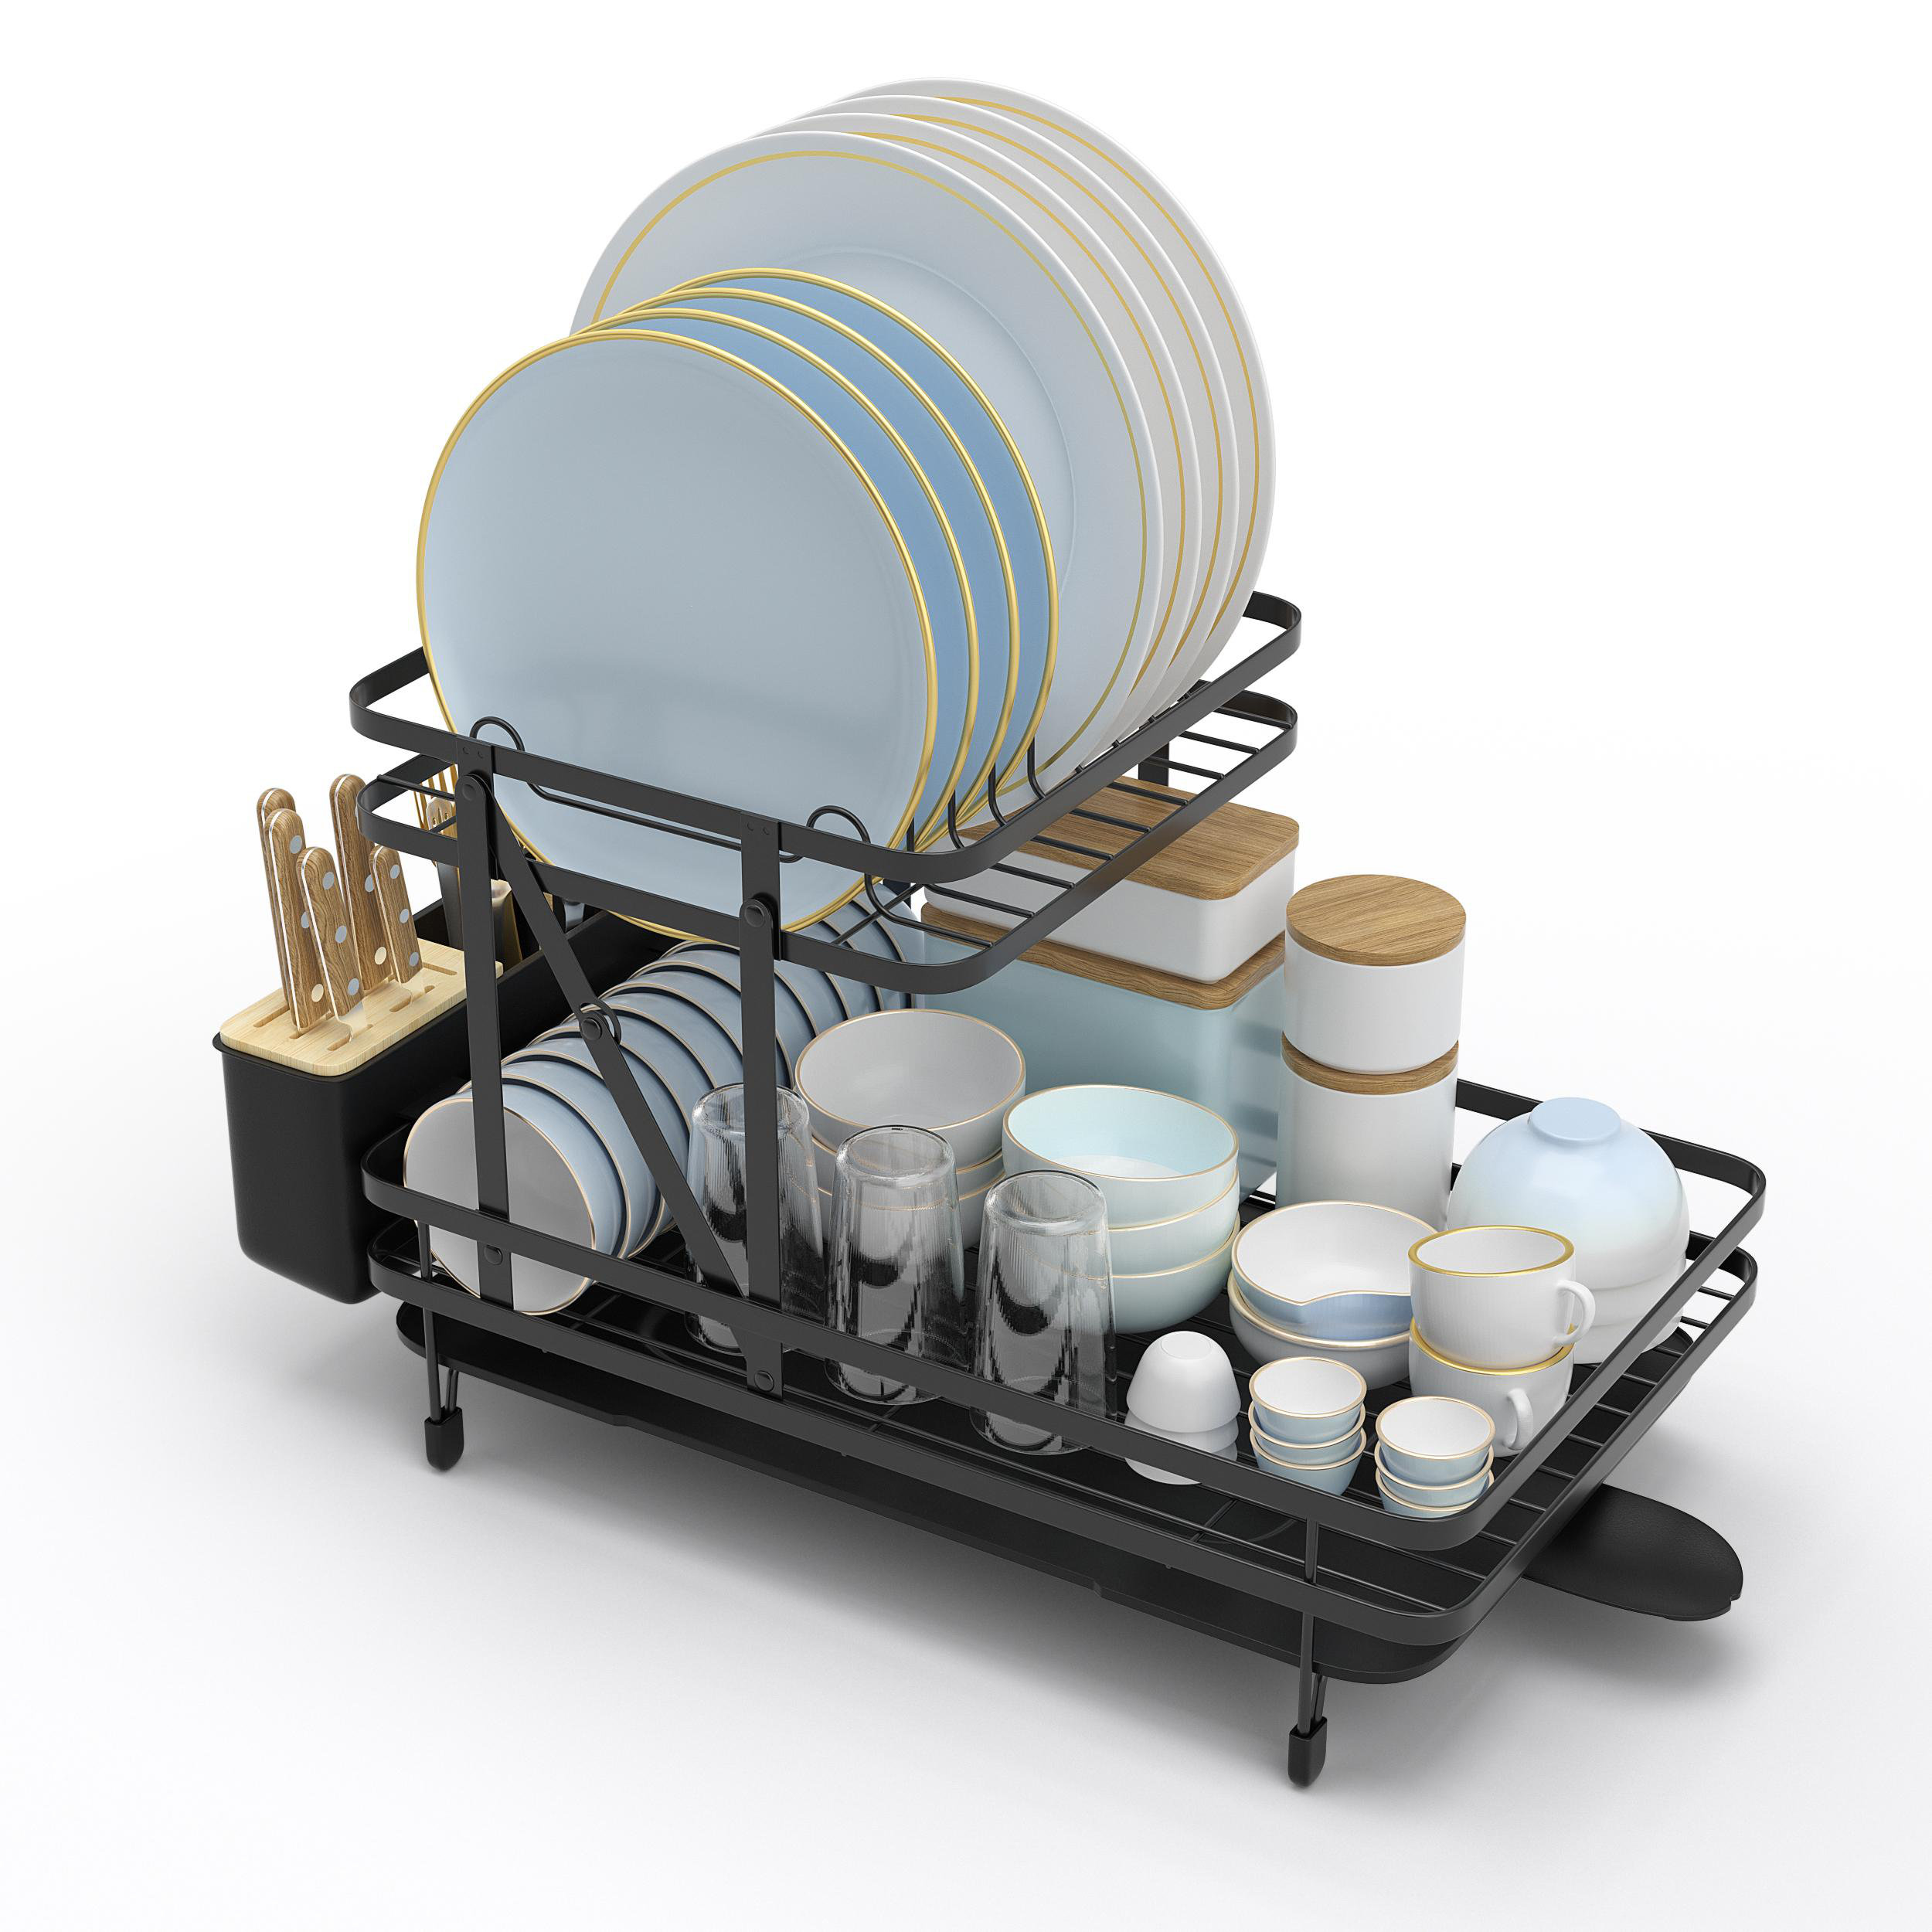 J&V Textiles Foldable Dish Drying Rack with Drainboard, Stainless Steel 2 Tier Dish Drainer Rack, Collapsible Dish Drainer, Folding Dish Rack for